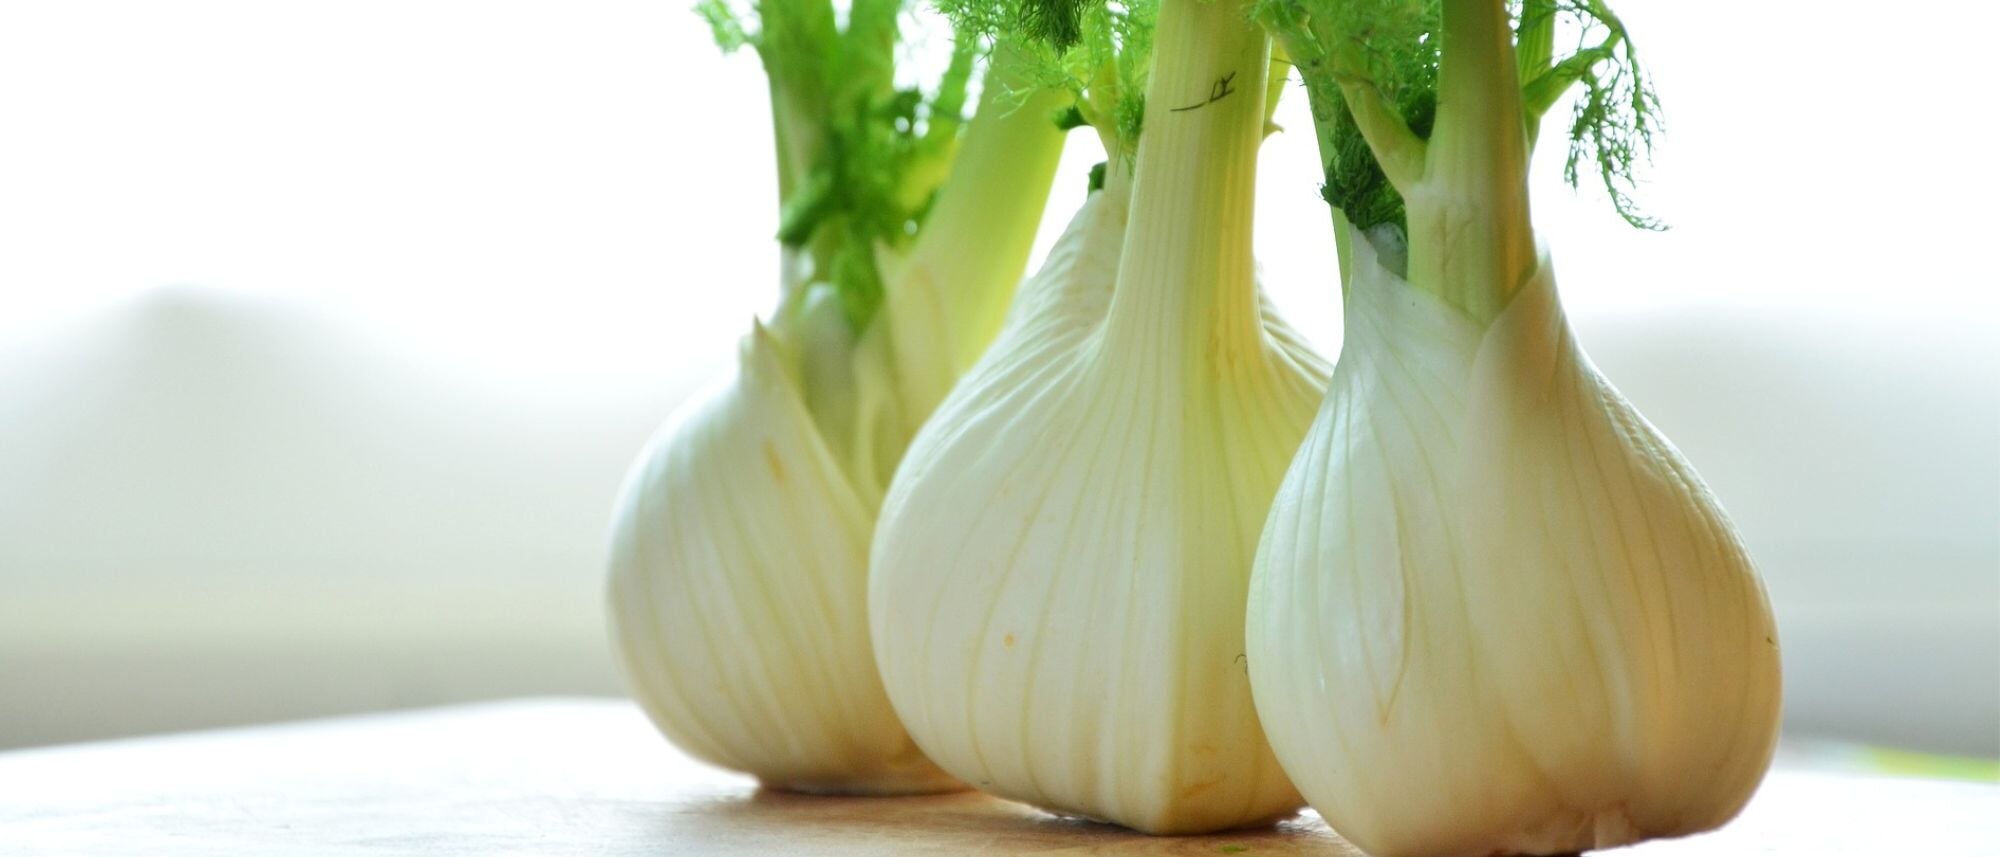 Grow this nutritious vegetable for its bulbs or use it as an herb to harvest and make delicious fennel spice